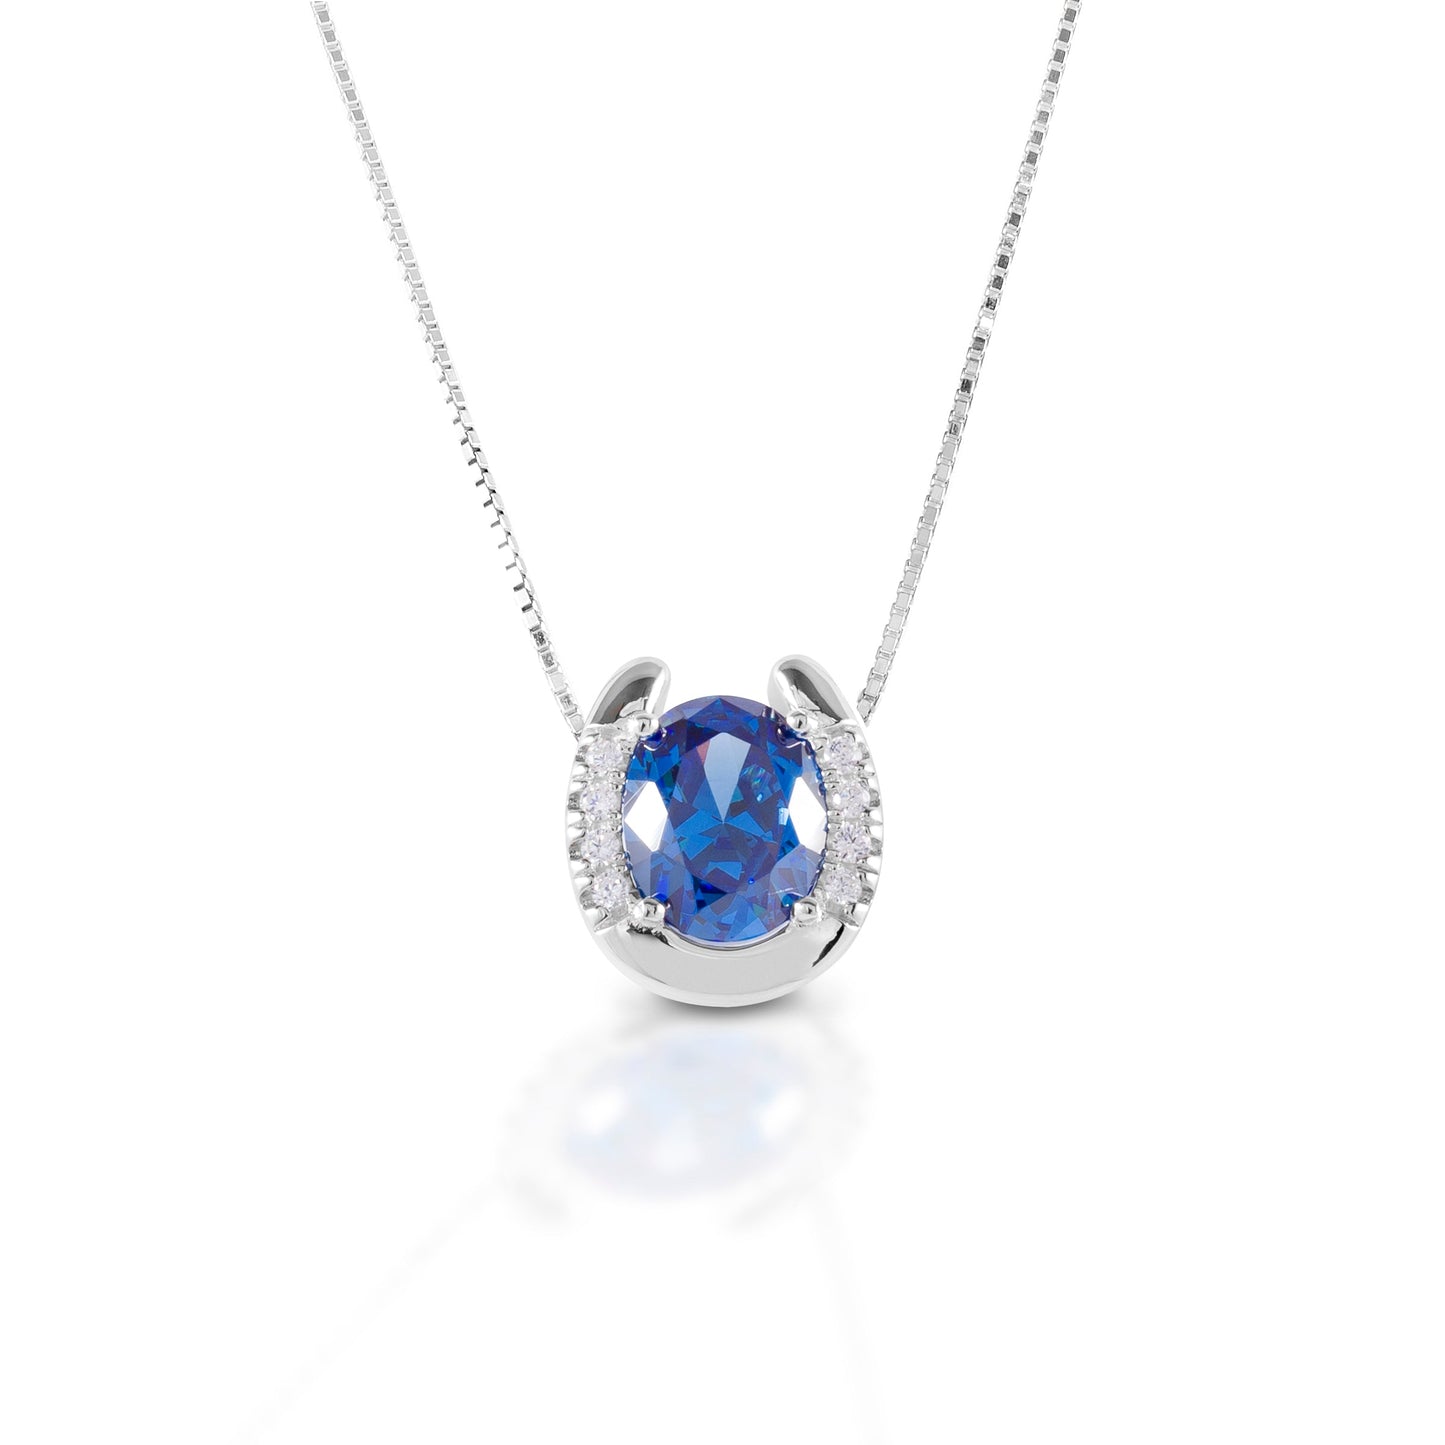 Kelly Herd jewelry, blue gemstone necklace with silver chain on white.